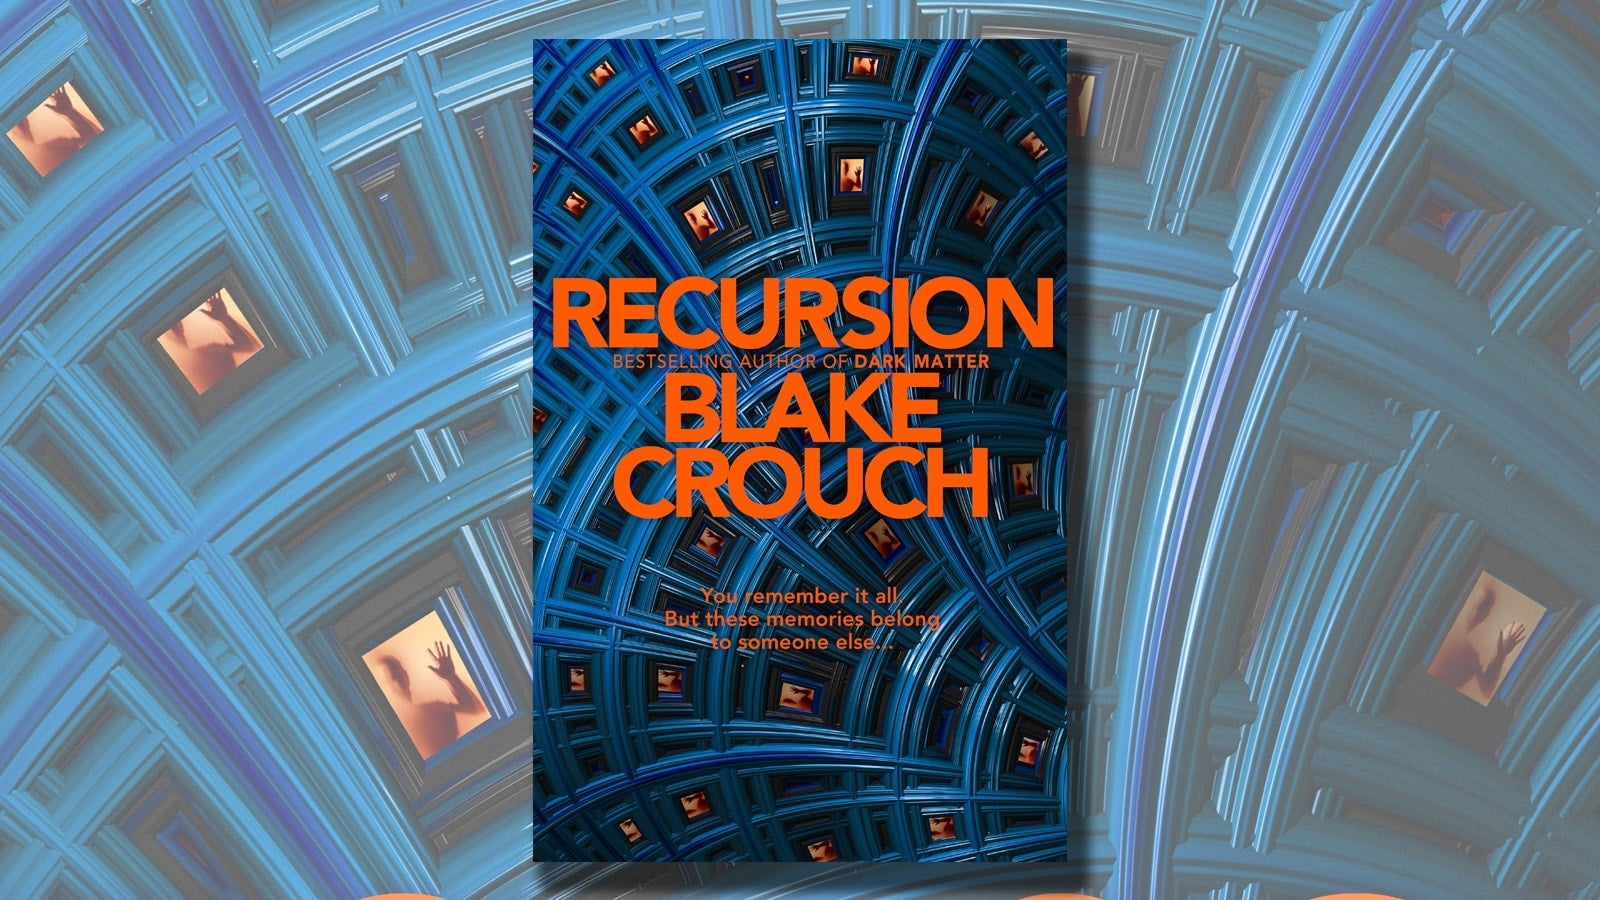 Recursion book cover against distorted ceiling